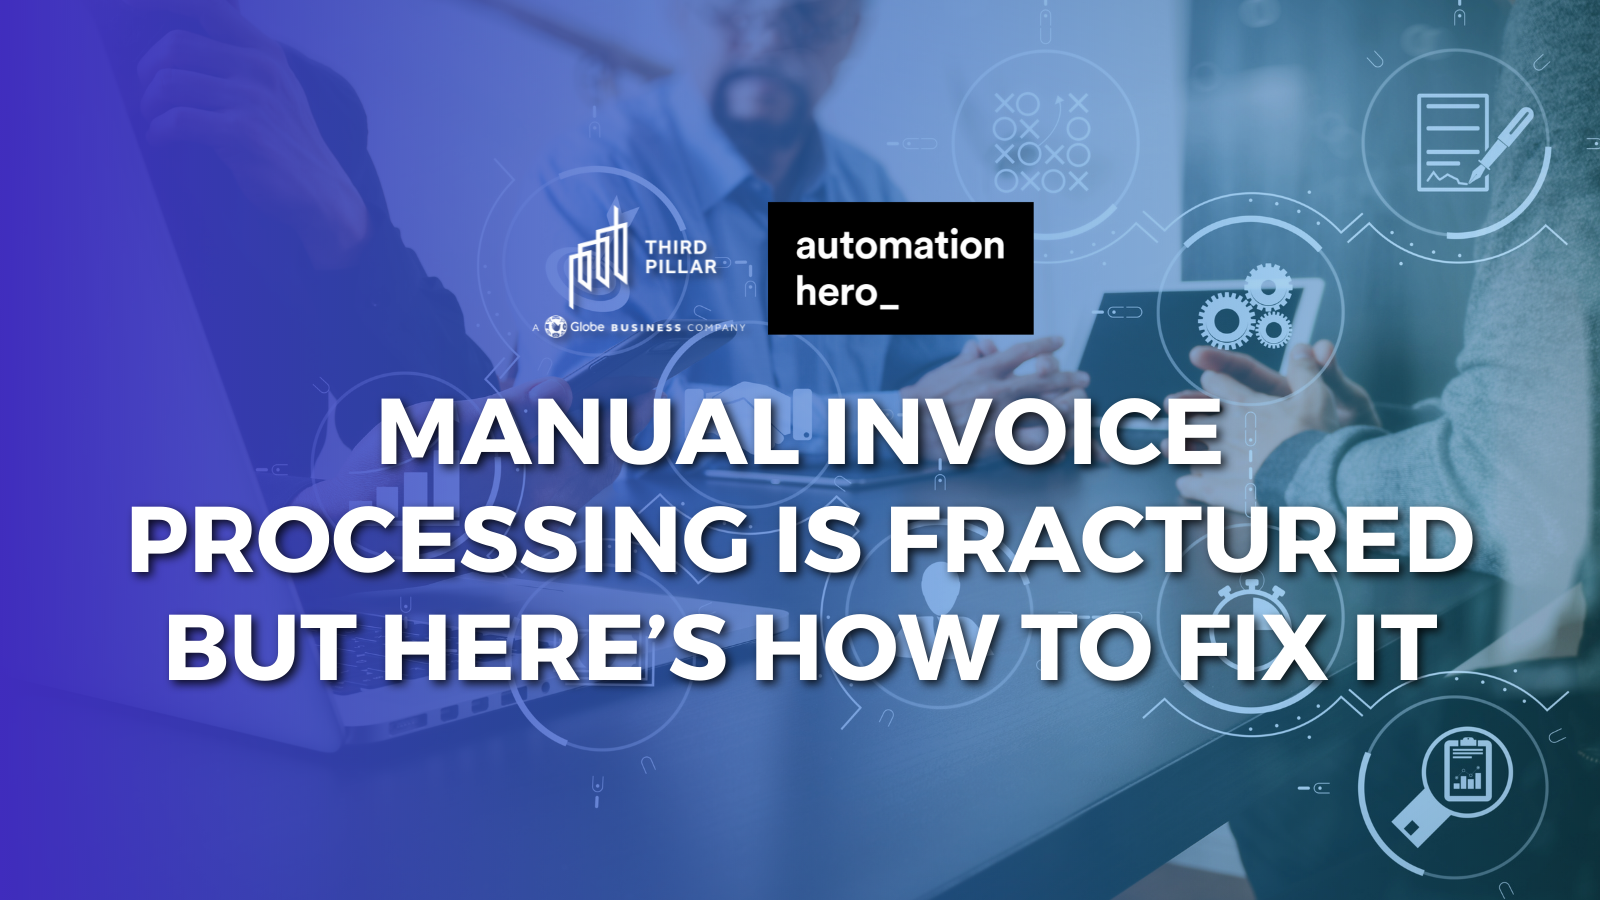 Manual invoice processing is fractured but here’s how to fix it